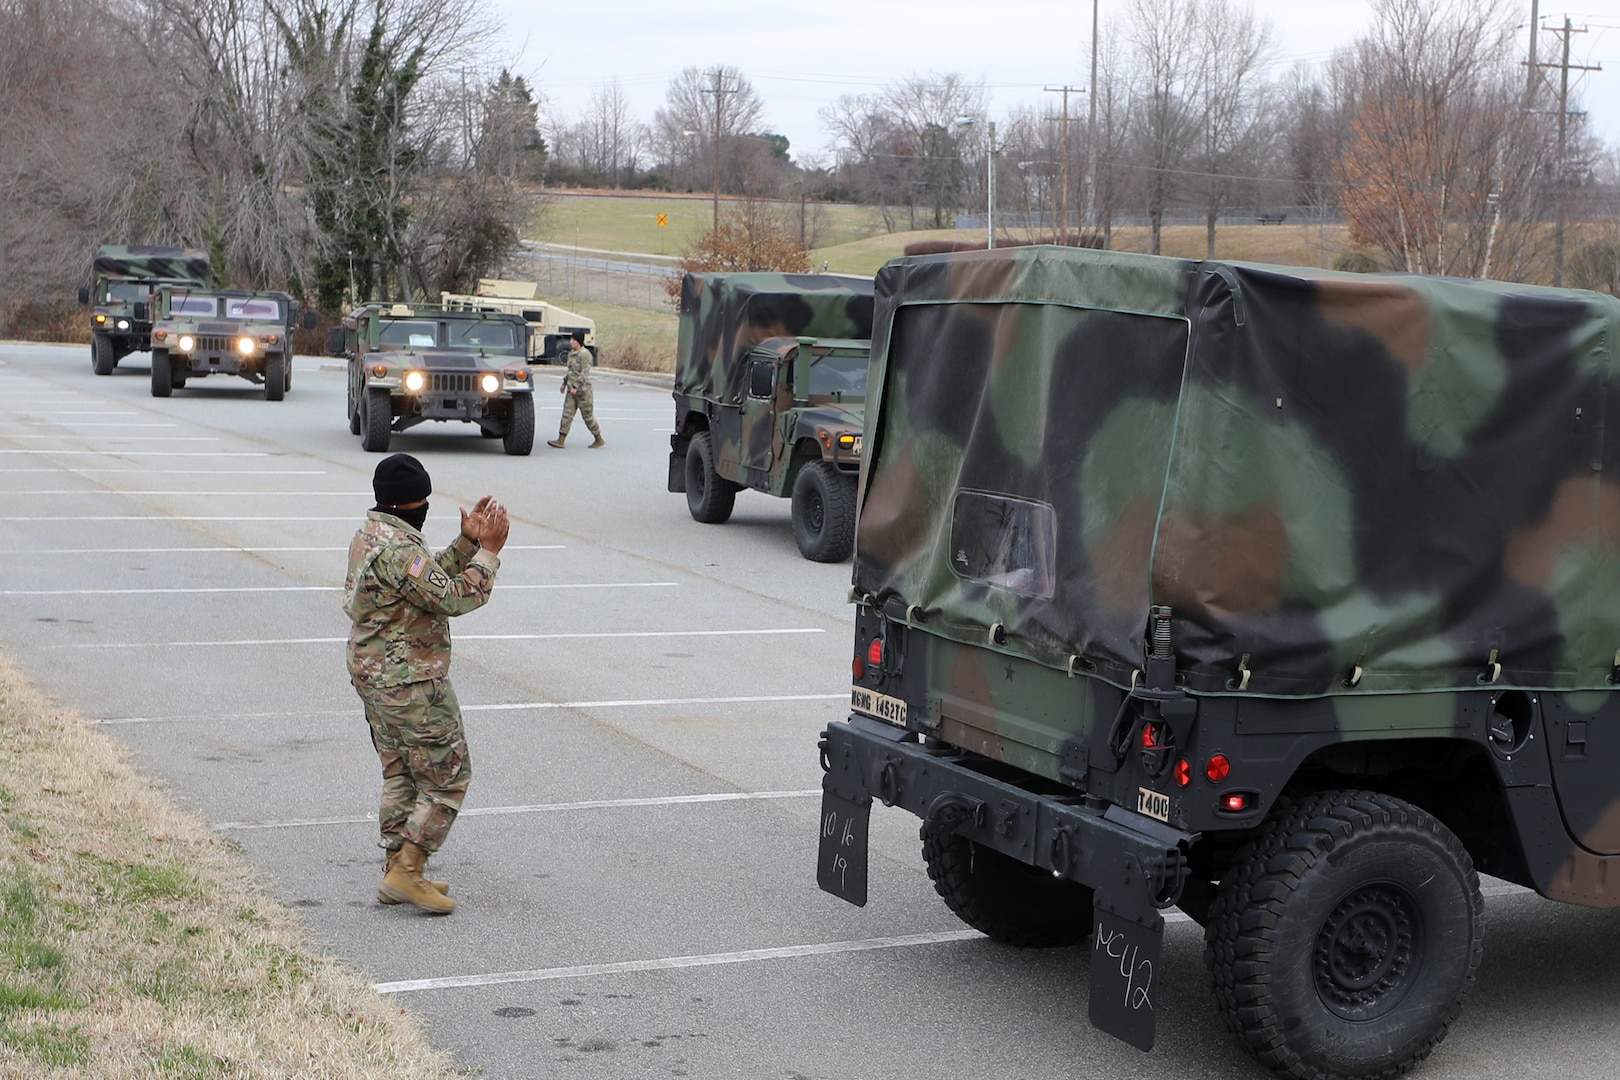 Soldiers of the North Carolina National Guard's 113th Sustainment Brigade deploy to the NCNG Readiness Center in Greensboro for Winter Storm Izzy Jan. 15, 2022. About 40 Soldiers were assigned to All Hazard Response Teams and other force packages to support local authorities’ response to a significant incoming winter storm in the region.